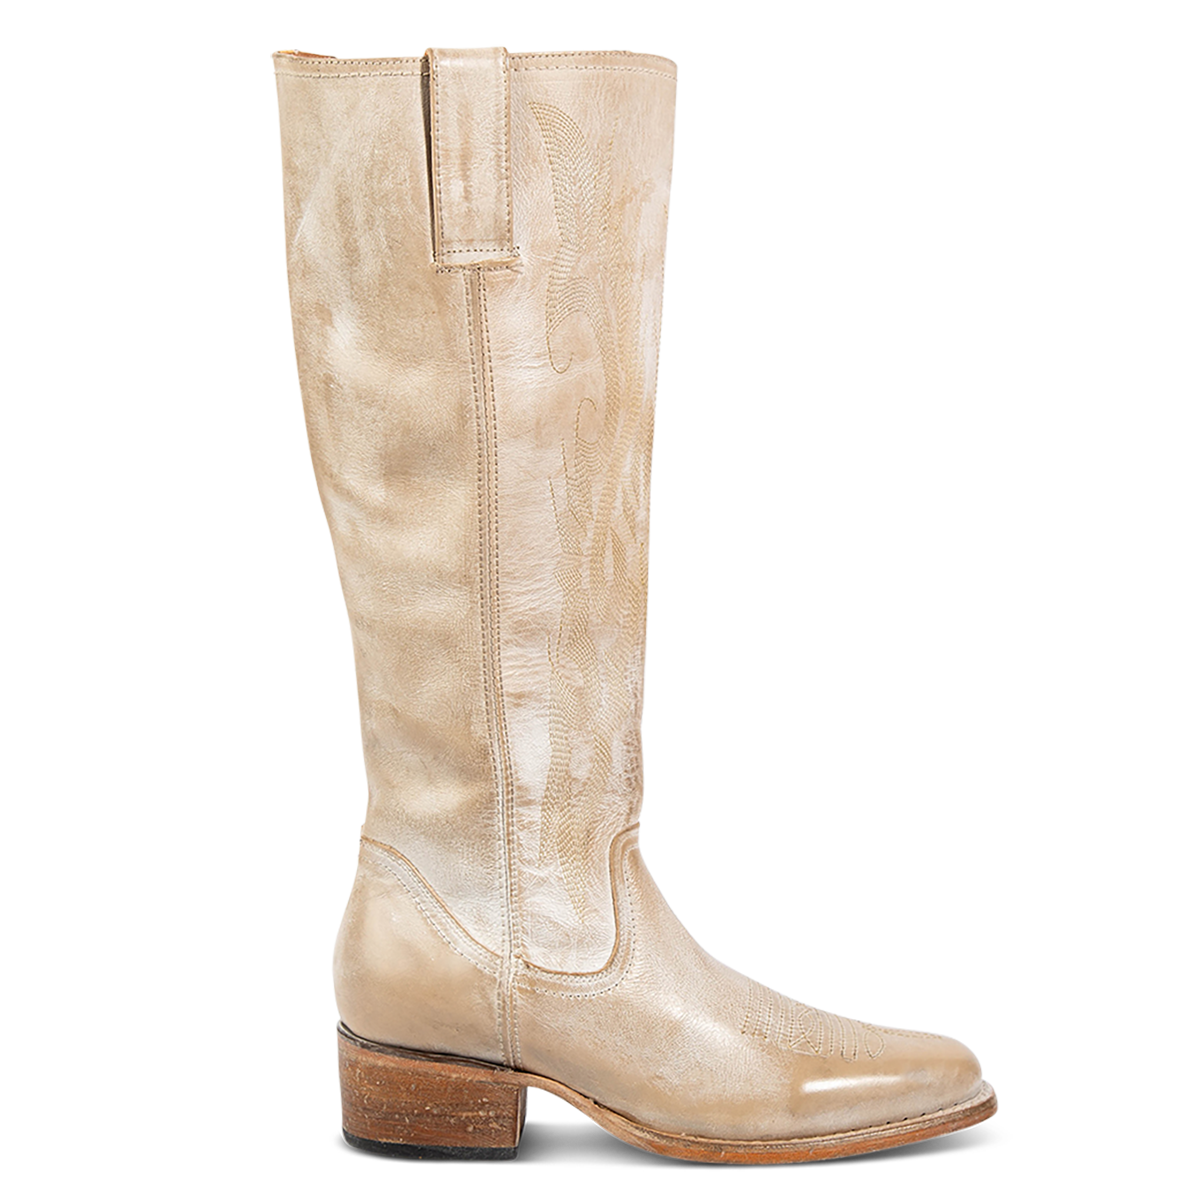 FREEBIRD women's Montana beige leather boot with intricate stitching, leather pull straps and a low block heel